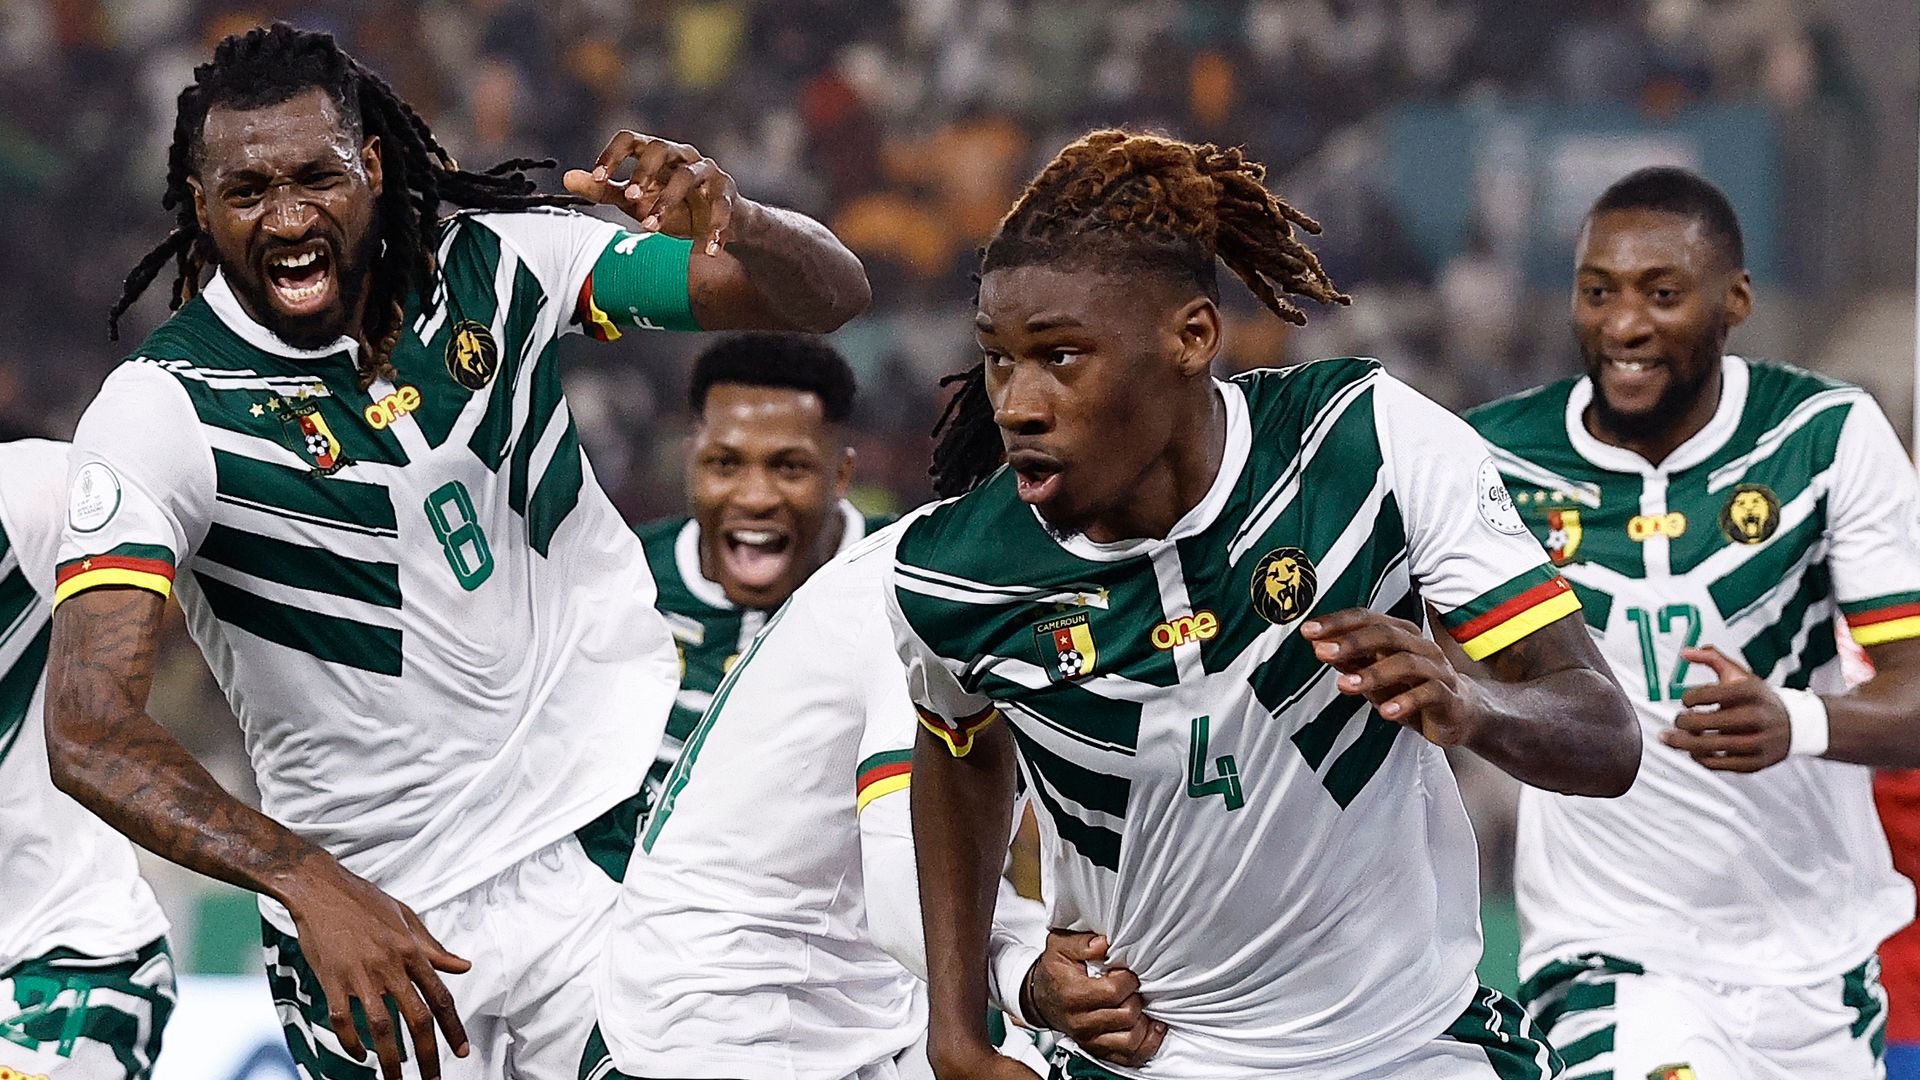 AFCON: Cameroon rally to advance to last 16 after classic